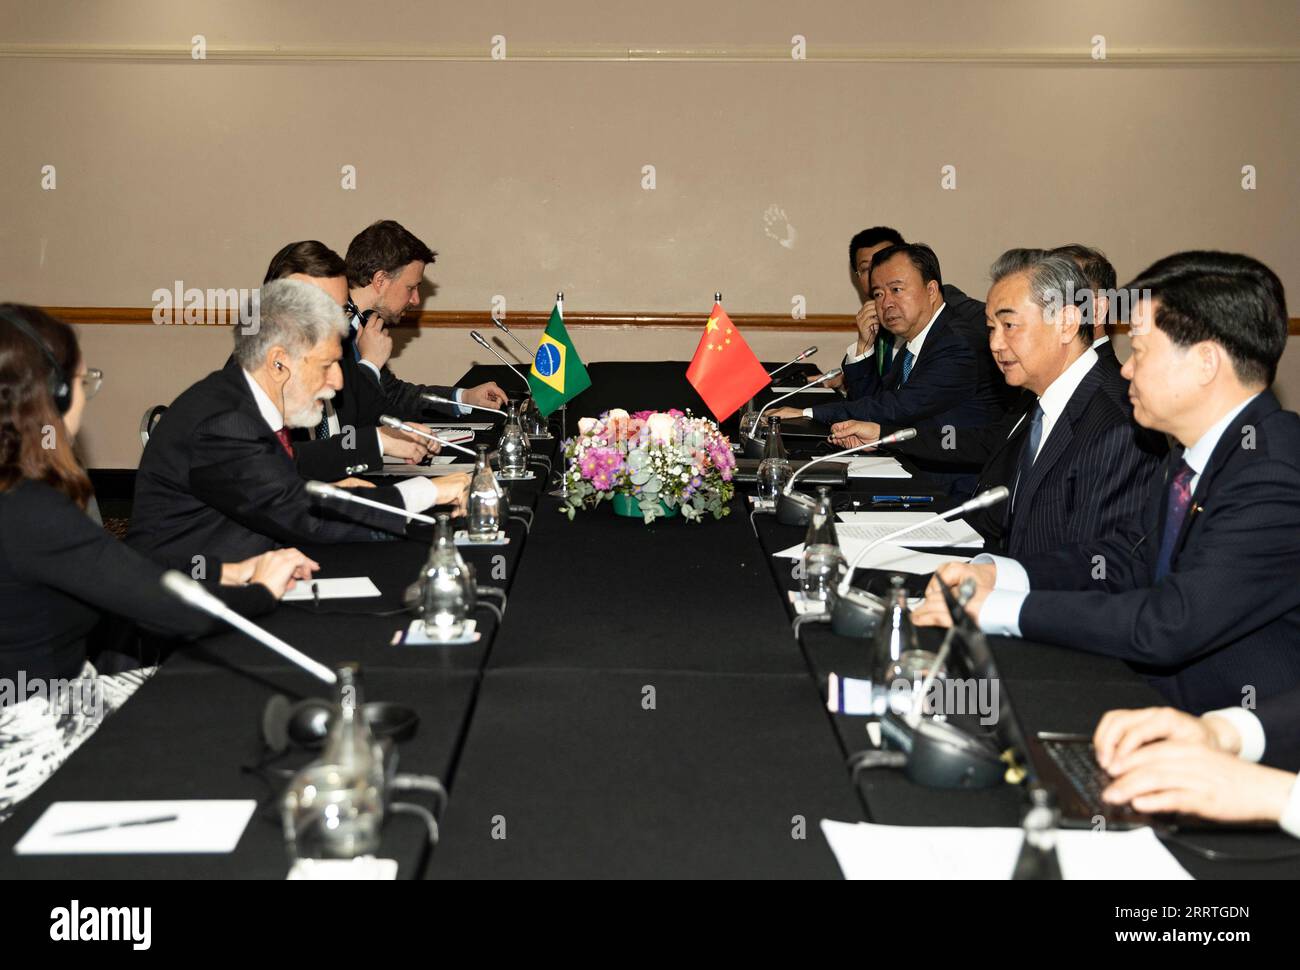 230724 -- JOHANNESBURG, July 24, 2023 -- Wang Yi 2nd R, director of the Office of the Communist Party of China Central Commission for Foreign Affairs, meets with Celso Luiz Nunes Amorim 2nd L, chief advisor of the Presidency of Brazil, in Johannesburg, South Africa, on July 24, 2023.  SOUTH AFRICA-JOHANNESBURG-CHINA-WANG YI-BRAZIL-CHIEF ADVISOR OF PRESIDENCY-MEETING ZhangxYudong PUBLICATIONxNOTxINxCHN Stock Photo